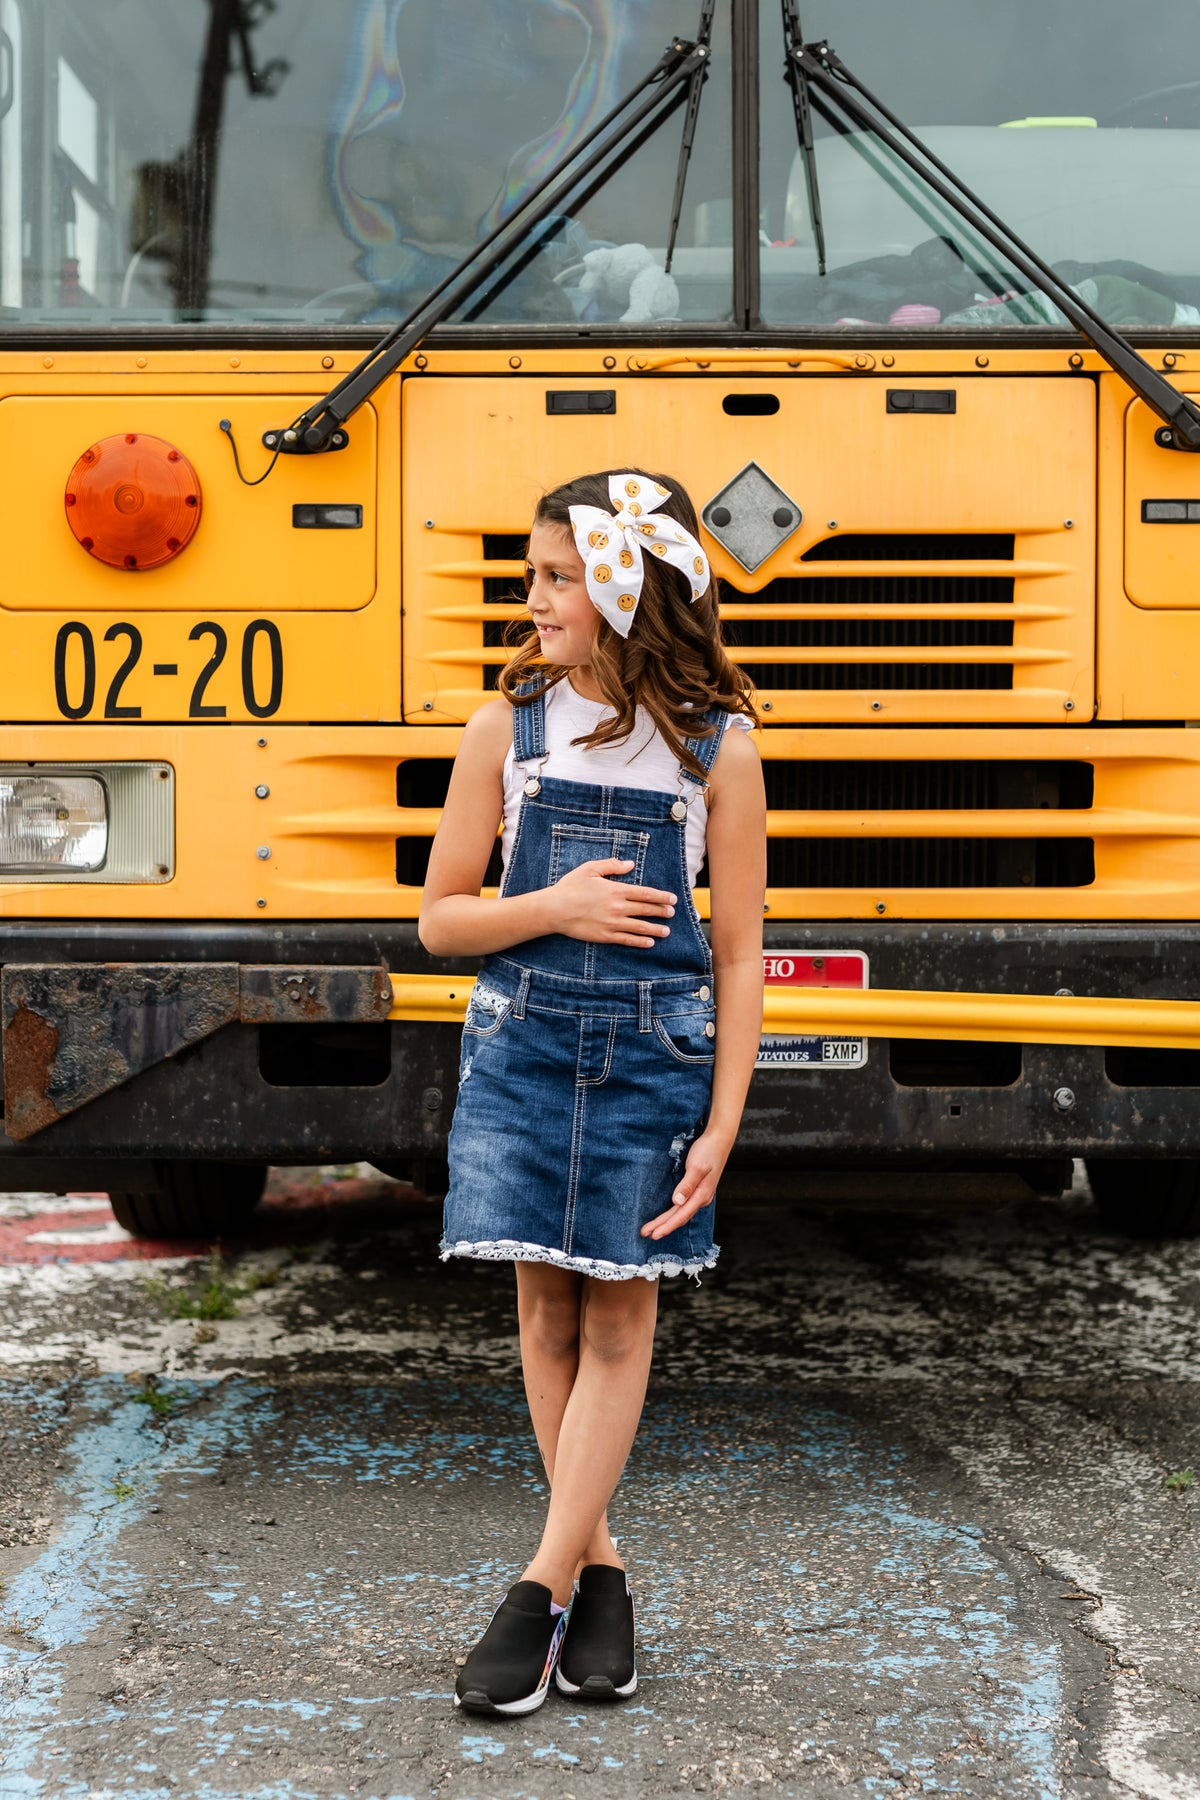 All Smiles | Whimsy Bow | School is Cool Collection